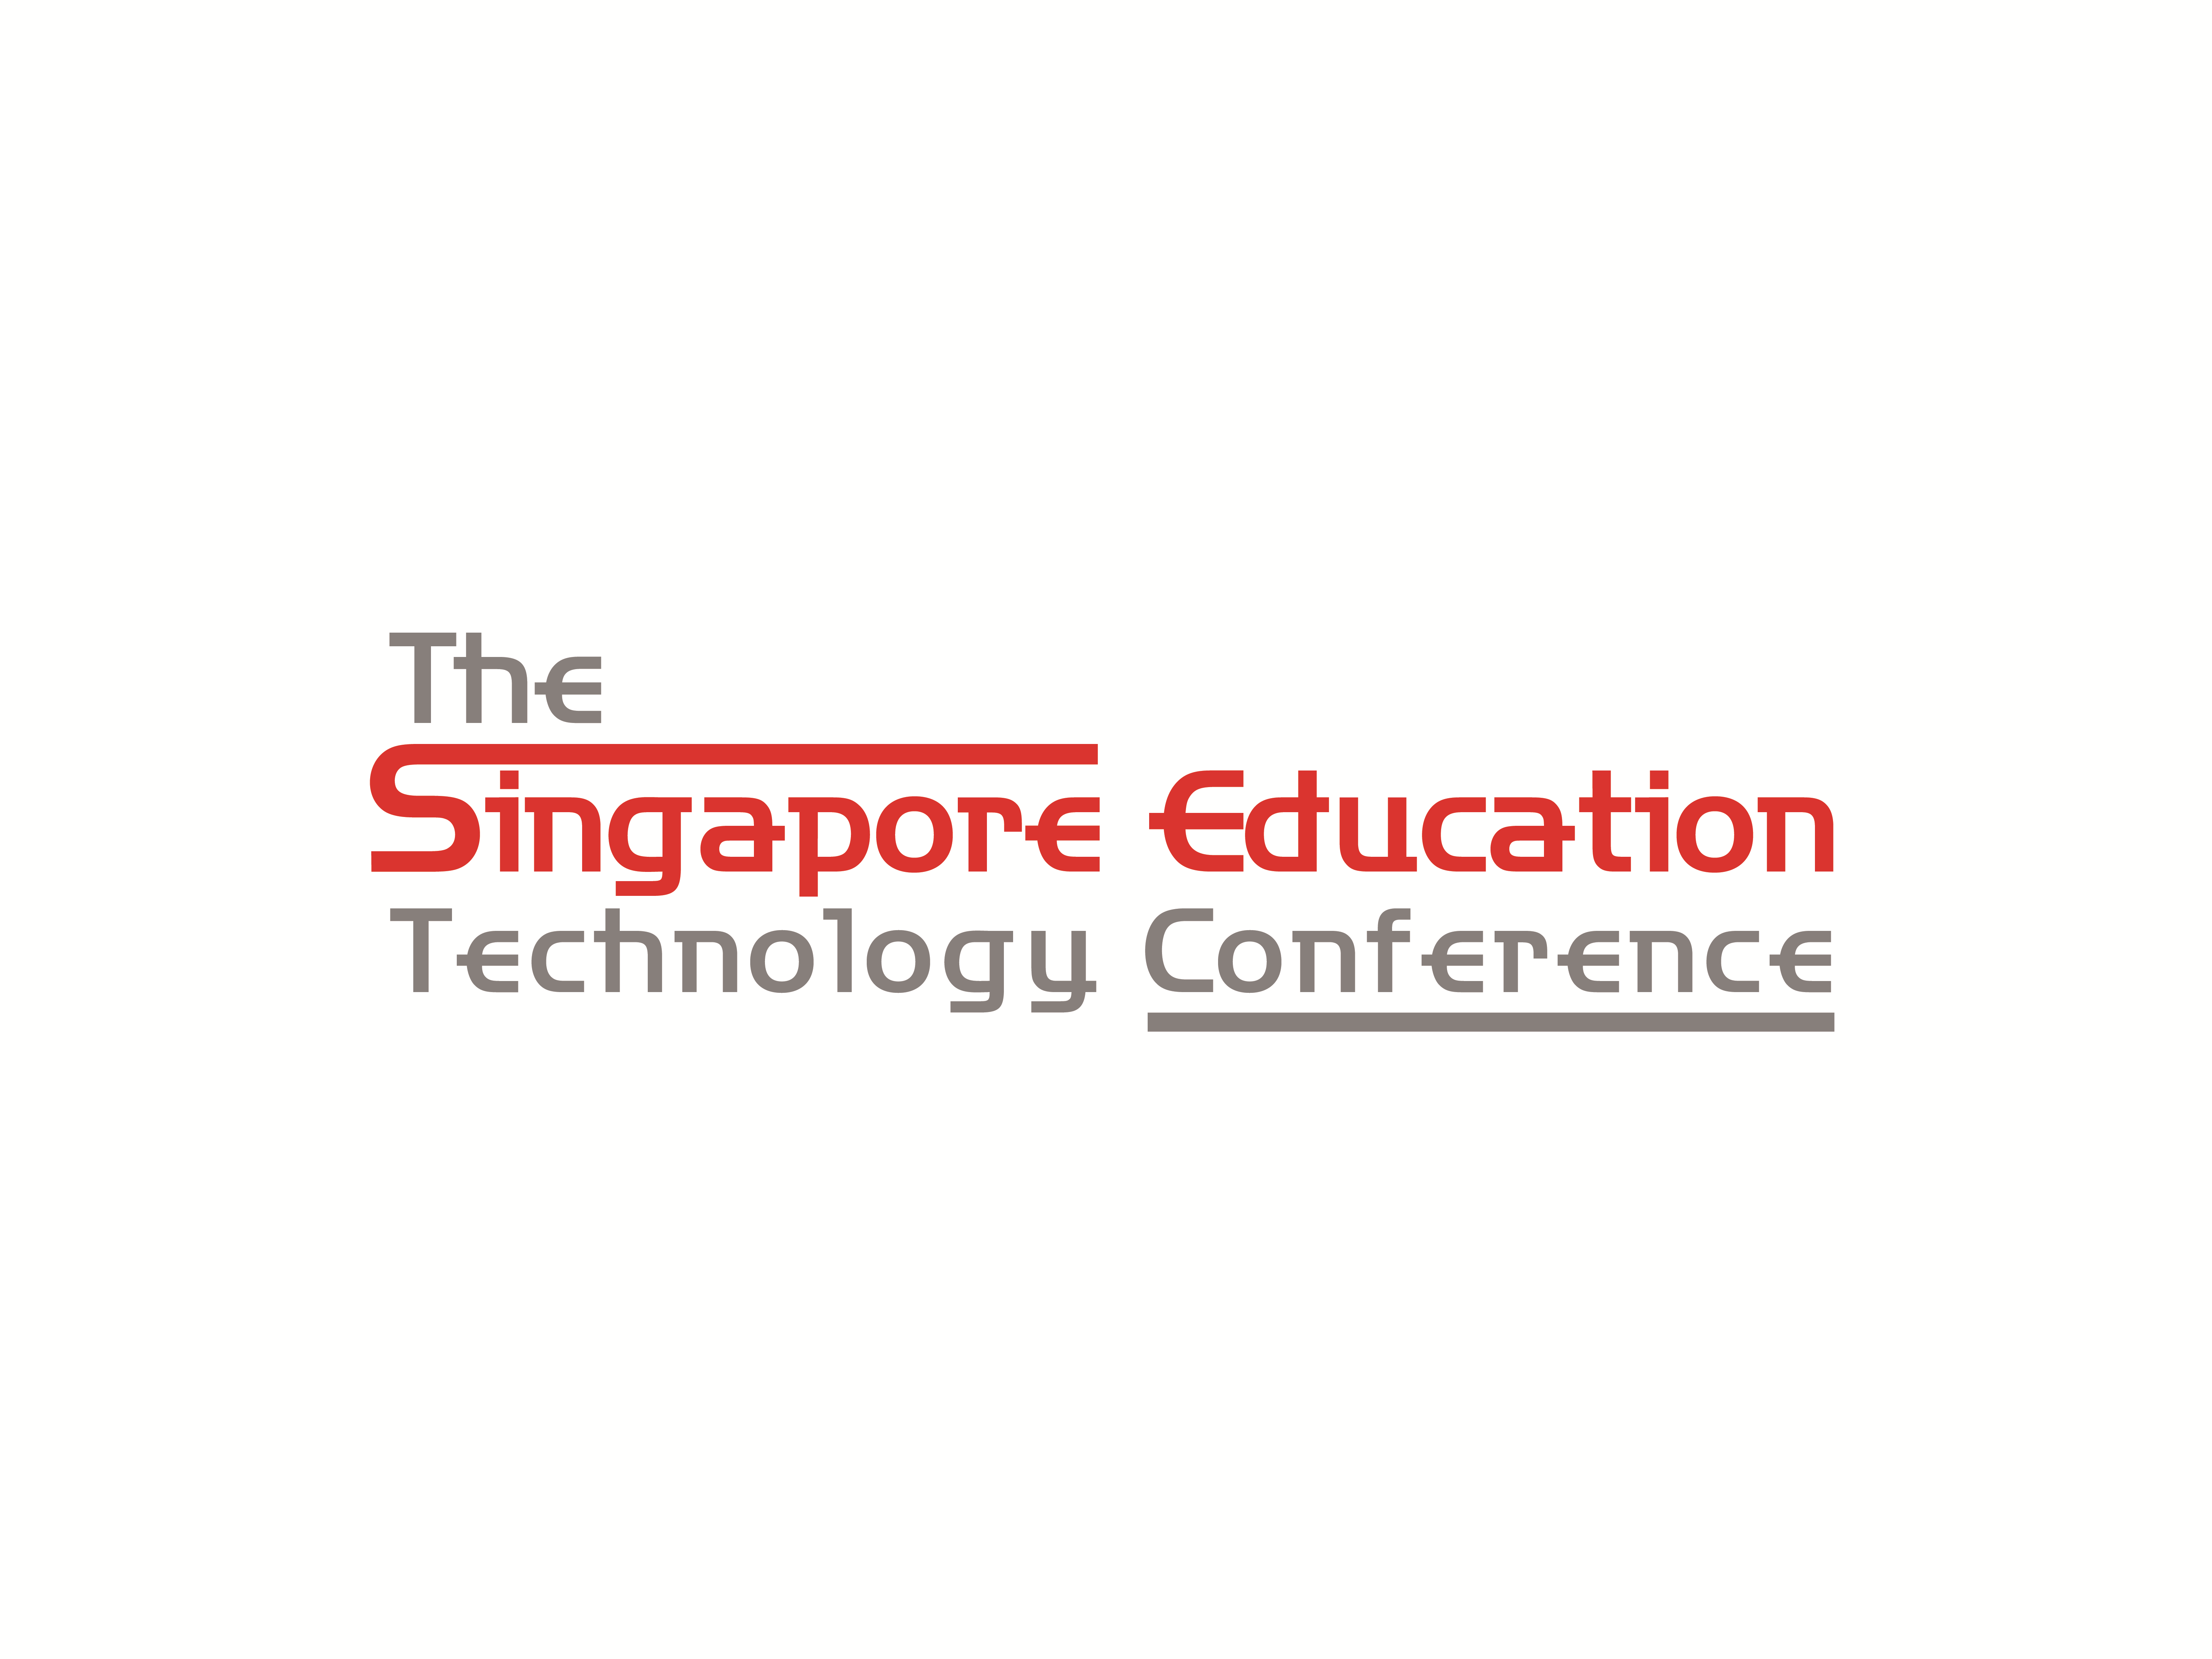 the Singapore Education Technology Conference 2018 